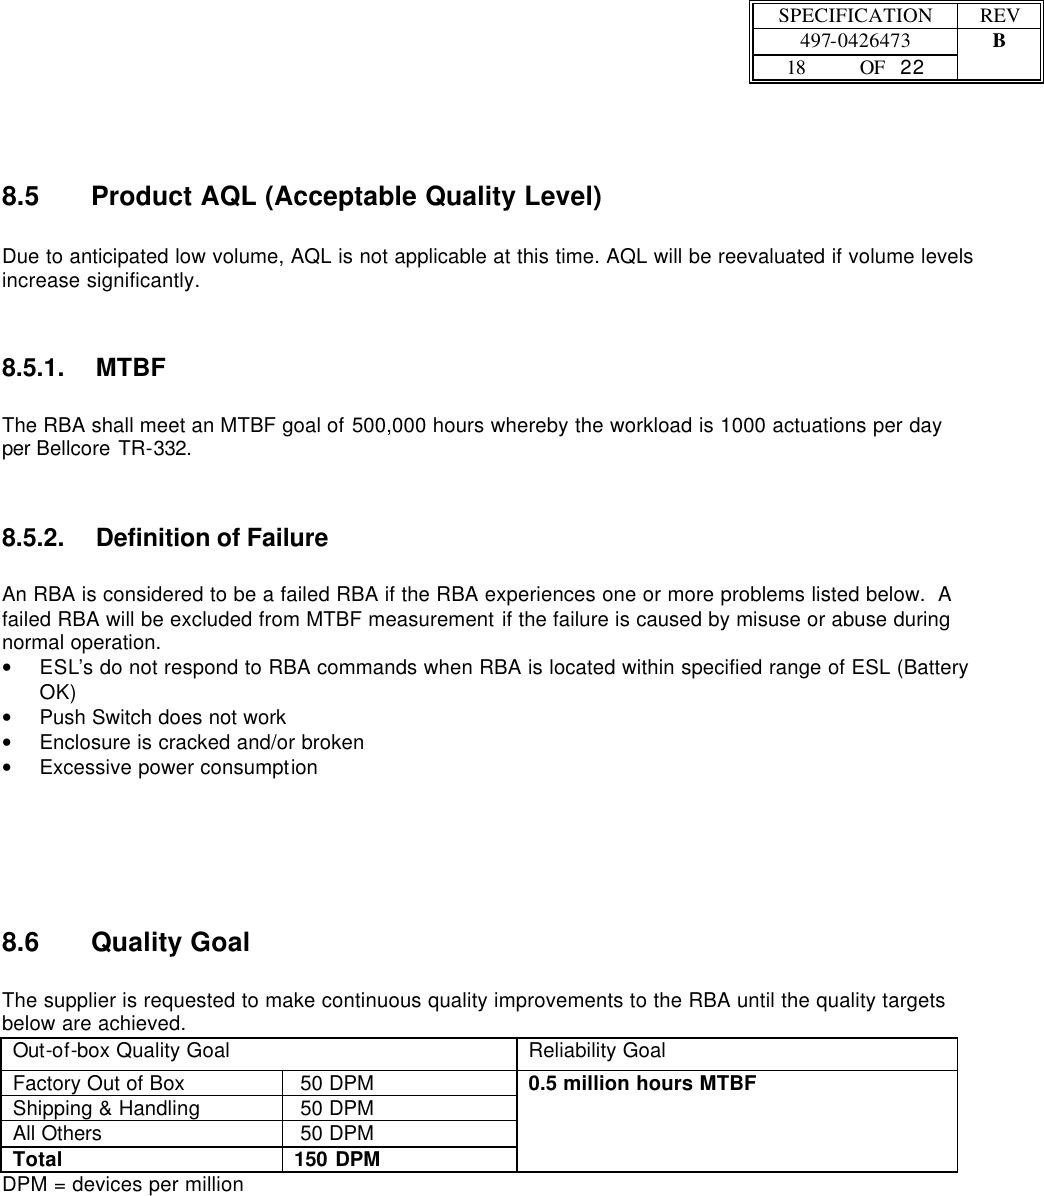  SPECIFICATION REV  497-0426473 B  18 OF   22    8.5 Product AQL (Acceptable Quality Level)  Due to anticipated low volume, AQL is not applicable at this time. AQL will be reevaluated if volume levels increase significantly. 8.5.1. MTBF   The RBA shall meet an MTBF goal of 500,000 hours whereby the workload is 1000 actuations per day per Bellcore TR-332. 8.5.2. Definition of Failure  An RBA is considered to be a failed RBA if the RBA experiences one or more problems listed below.  A failed RBA will be excluded from MTBF measurement if the failure is caused by misuse or abuse during normal operation. • ESL’s do not respond to RBA commands when RBA is located within specified range of ESL (Battery OK) • Push Switch does not work  • Enclosure is cracked and/or broken • Excessive power consumption    8.6 Quality Goal  The supplier is requested to make continuous quality improvements to the RBA until the quality targets below are achieved.   Out-of-box Quality Goal  Reliability Goal Factory Out of Box  50 DPM Shipping &amp; Handling   50 DPM All Others  50 DPM Total 150 DPM 0.5 million hours MTBF DPM = devices per million 